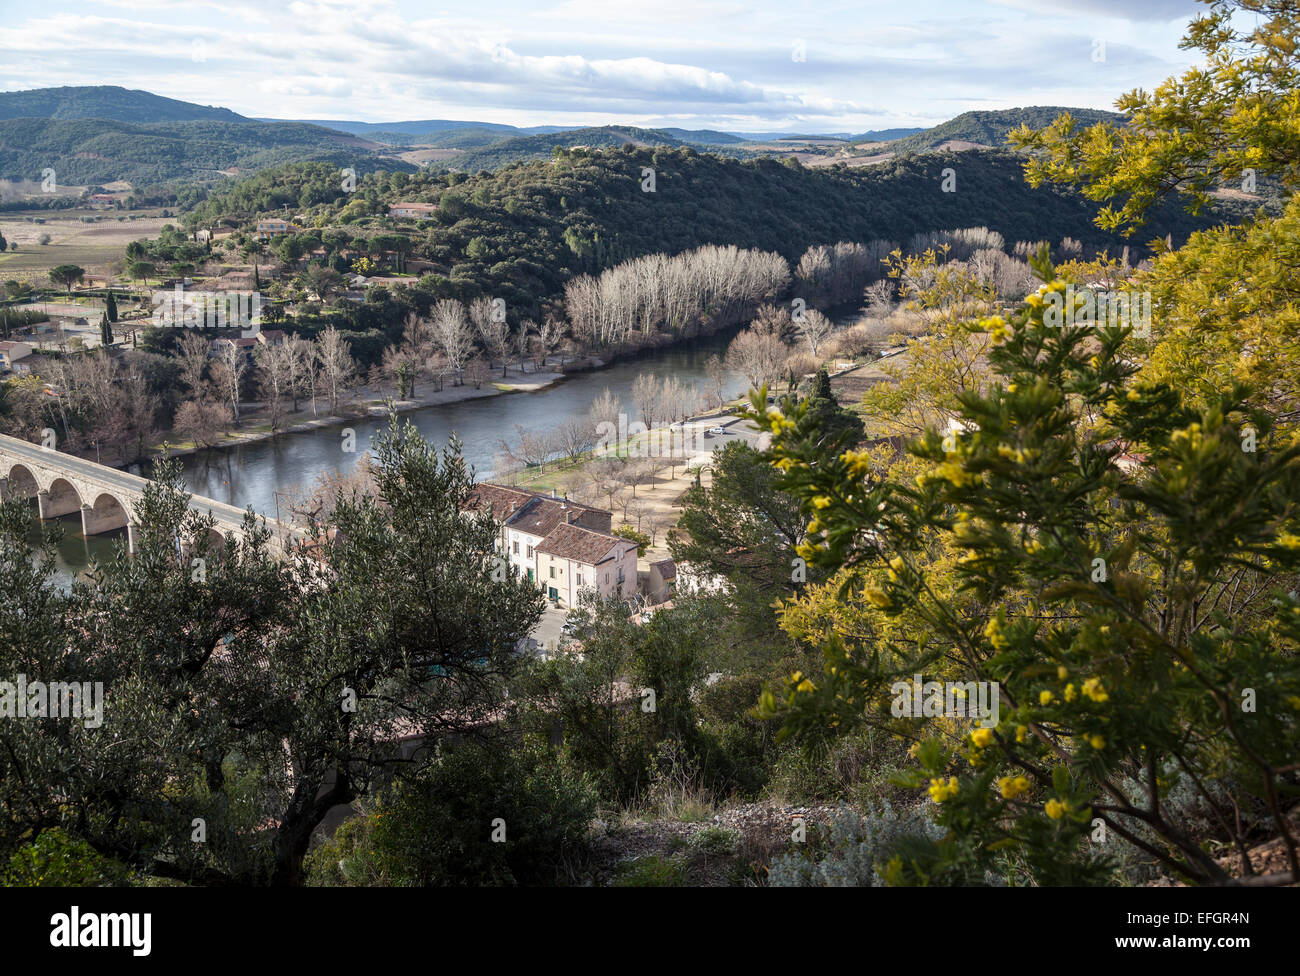 View of Roquebrun a village in the Hérault region of France on the river Orb with valley and hills in the background Stock Photo